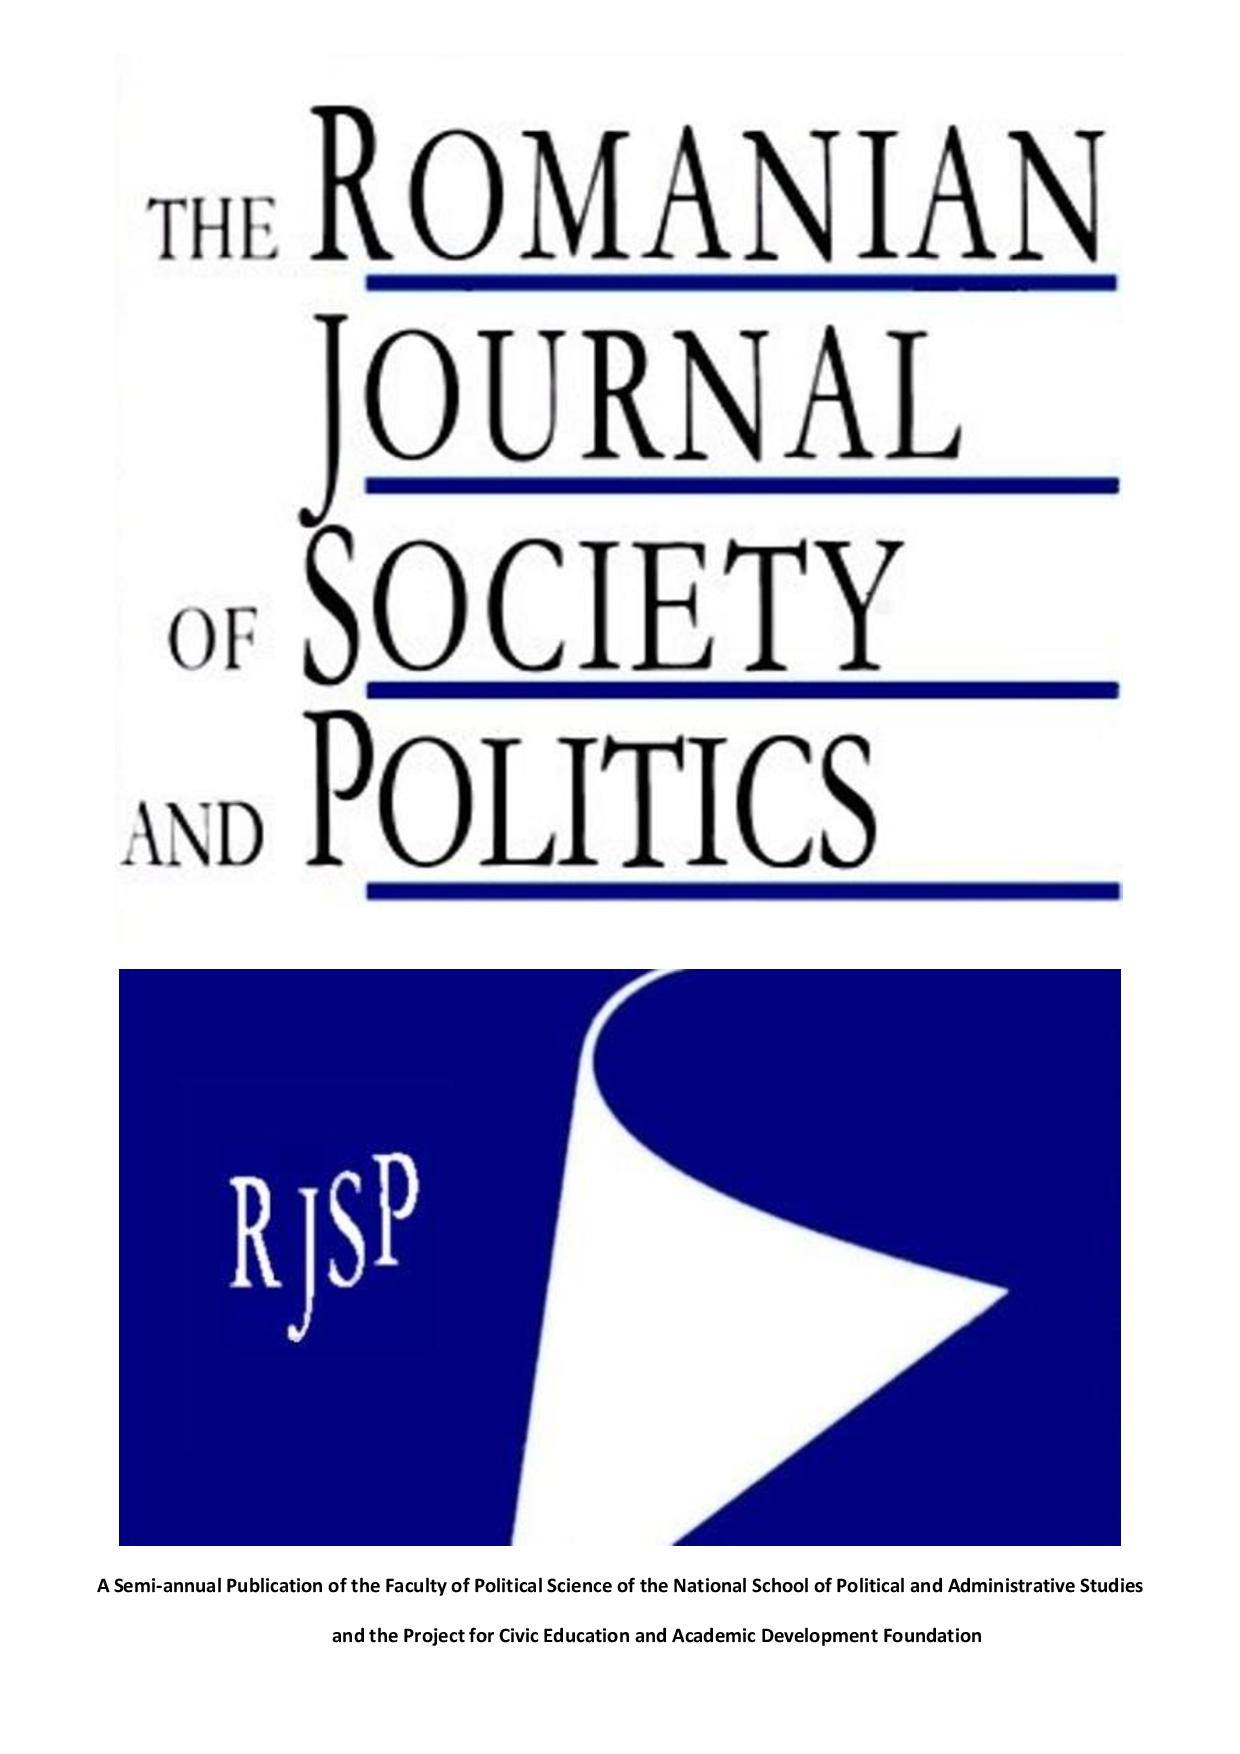 INTEGRATION PATTERNS OF ROMANIAN IMMIGRANTS
IN THE ISRAELI SOCIETY: SOCIOPOLITICAL ASPECTS